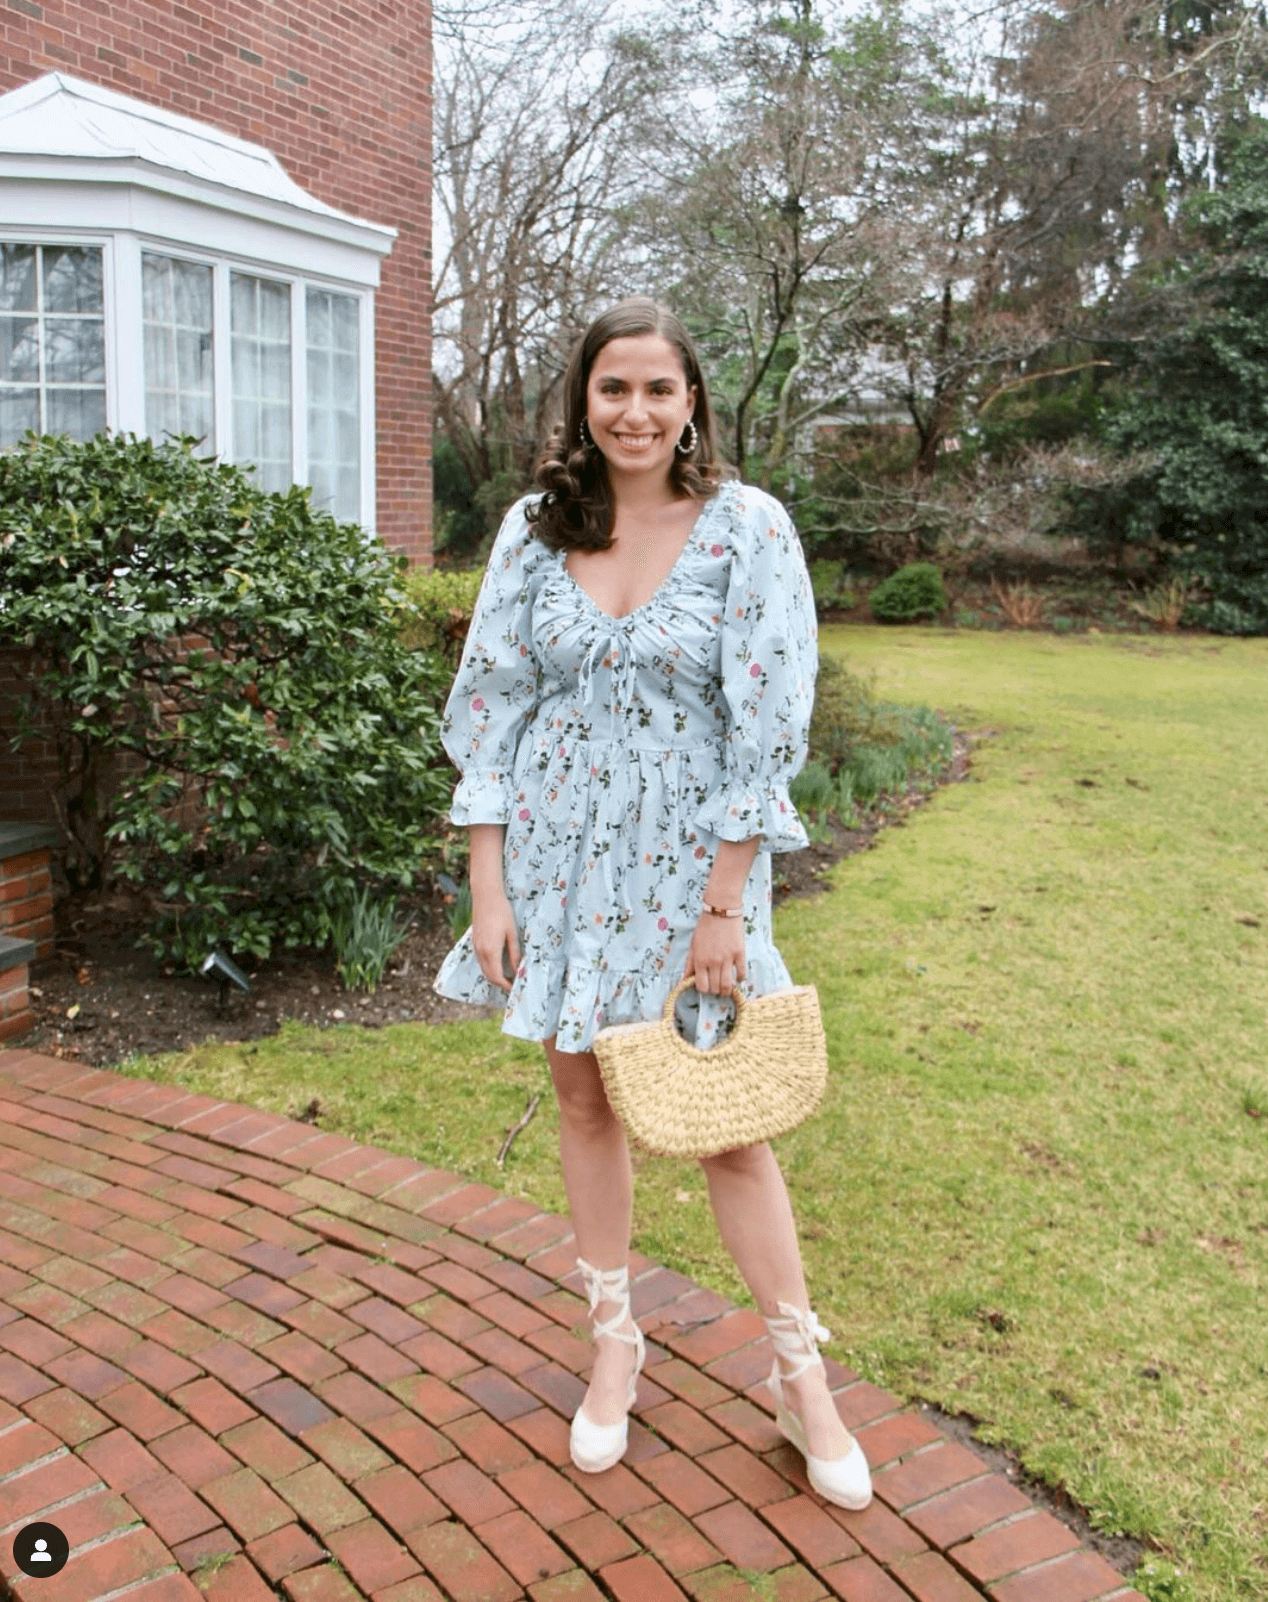 Woman wearing ivory espadrille wedges in a blue dress in UGC style